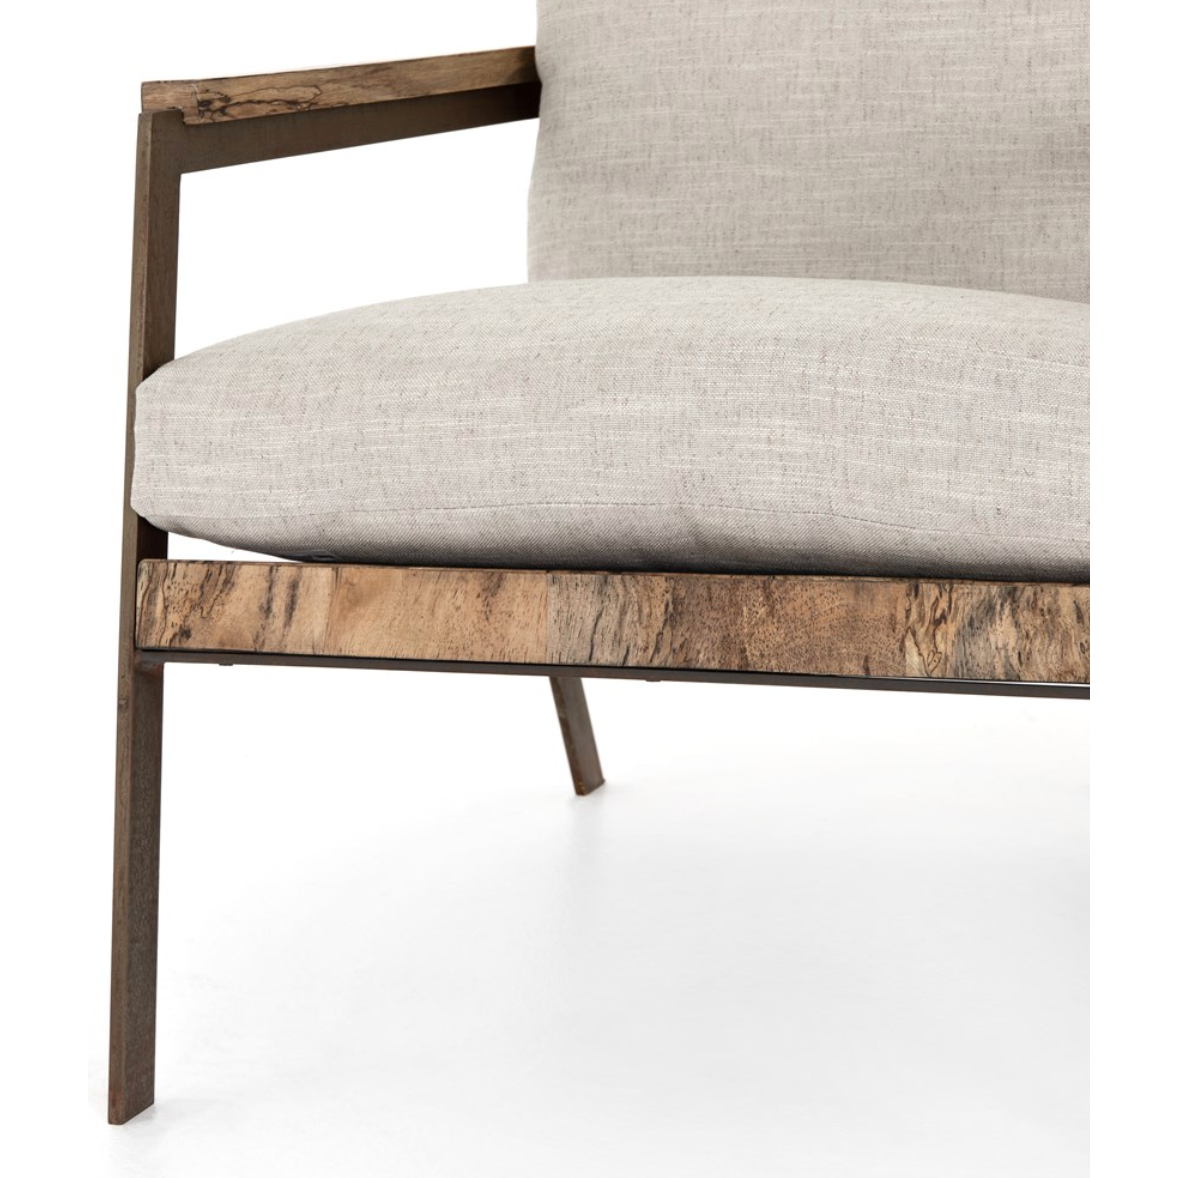 This collection features exclusive, artisan finishes. Oxidation transforms heavy materials into something light and elegant. Iron is acid-washed and sealed to preserve the moment in time. Heavily distressed, reclaimed oak contrasts with smooth, splayed legs. Geometric and flatstock underpinnings feel ahead of the curve.  Colors: Valley Nimbus, Oxidized Iron, Spalted Primavera